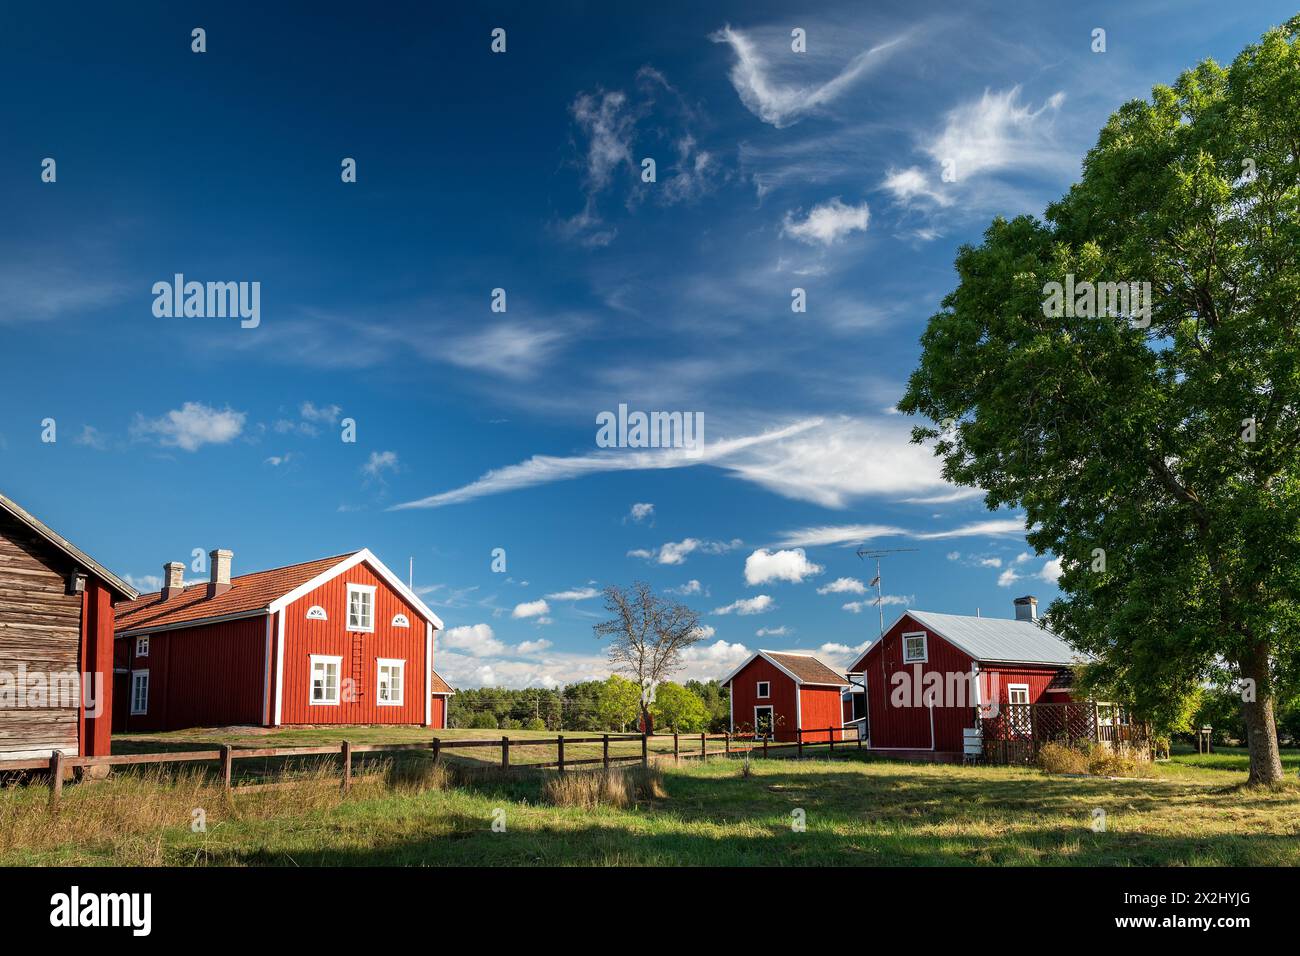 Falun red or Swedish red painted houses, farm, Geta, Aland, or Aland Islands, Gulf of Bothnia, Baltic Sea, Finland Stock Photo